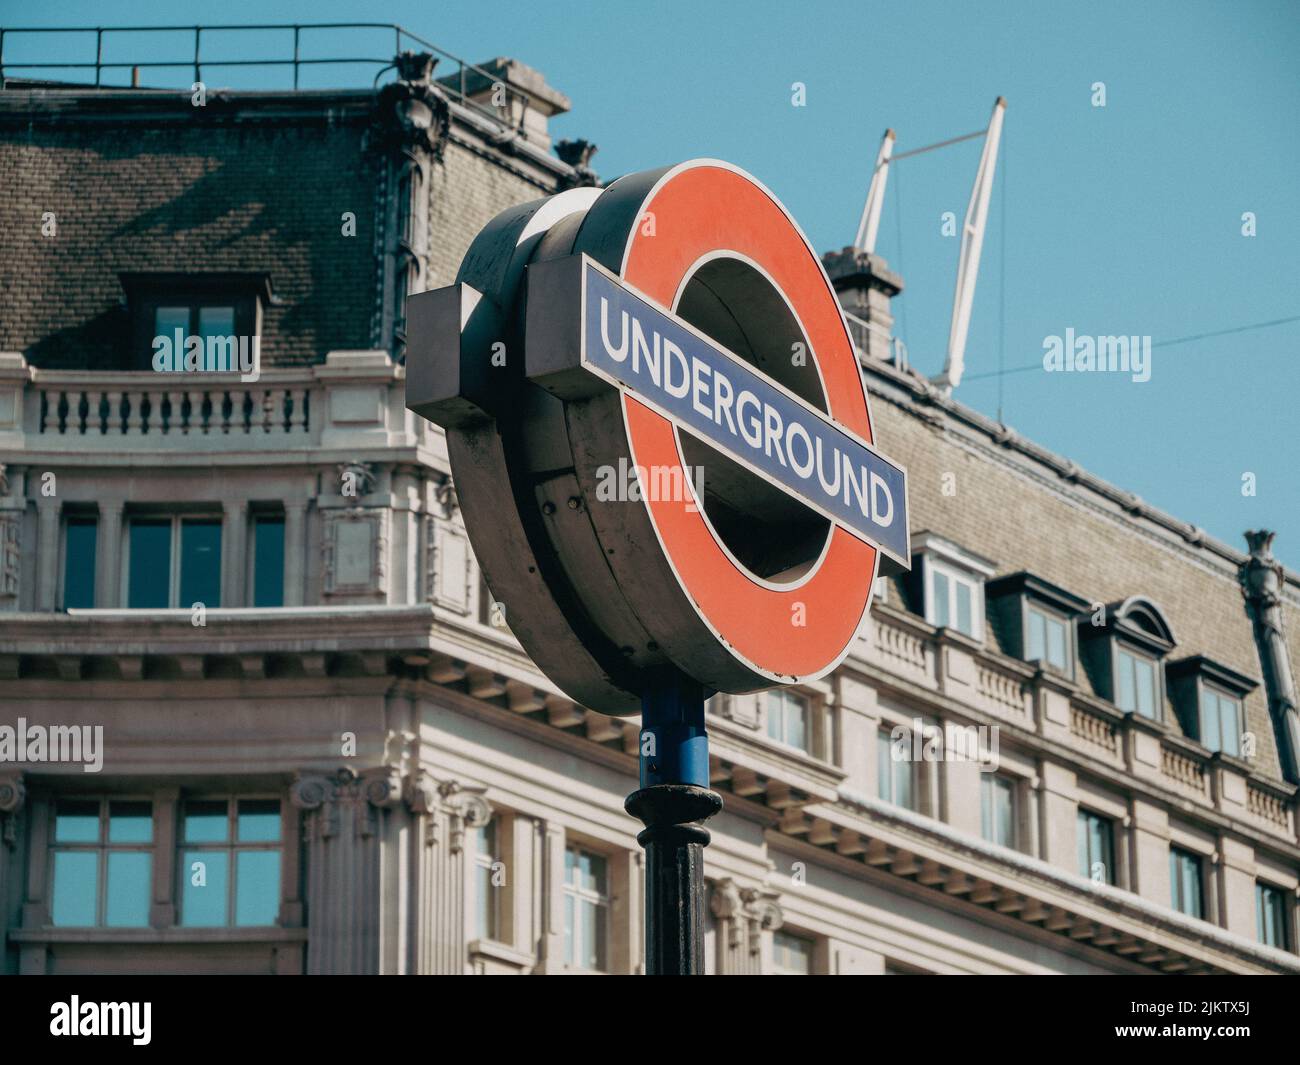 A traditional London Underground sign on the background of old buildings in Oxford Circus station Stock Photo